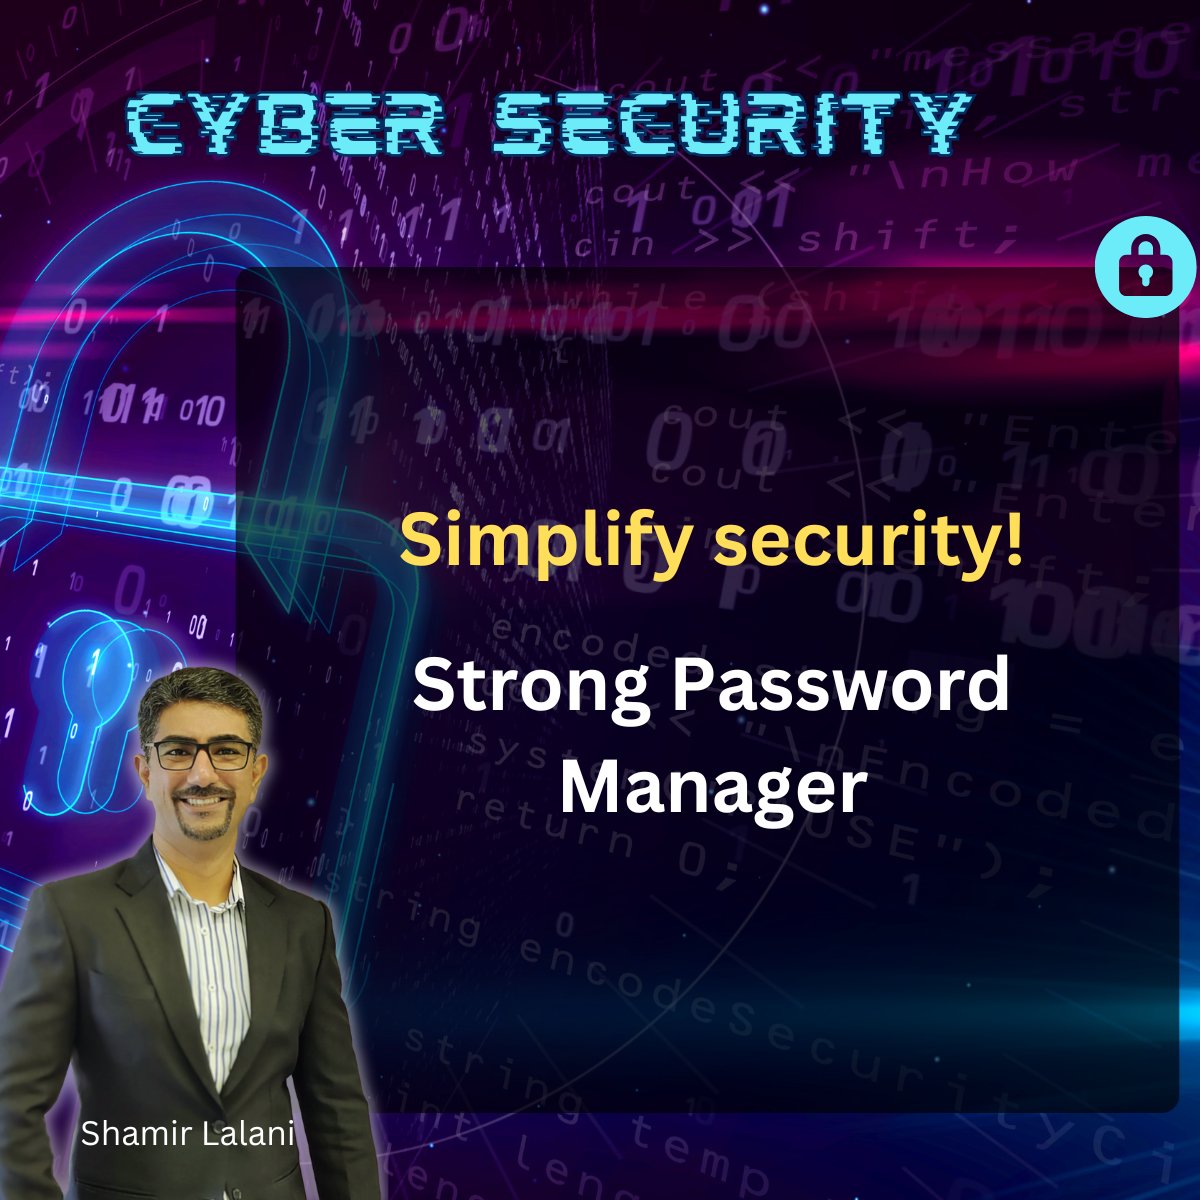 Invest in a reputable password manager to create and store strong, unique passwords. 

#passwordsafety #onlineprotection #digitalsecurity #securepasswords #protectyourdata #passwordmanager #cybersecuritytools #securitybestpractices